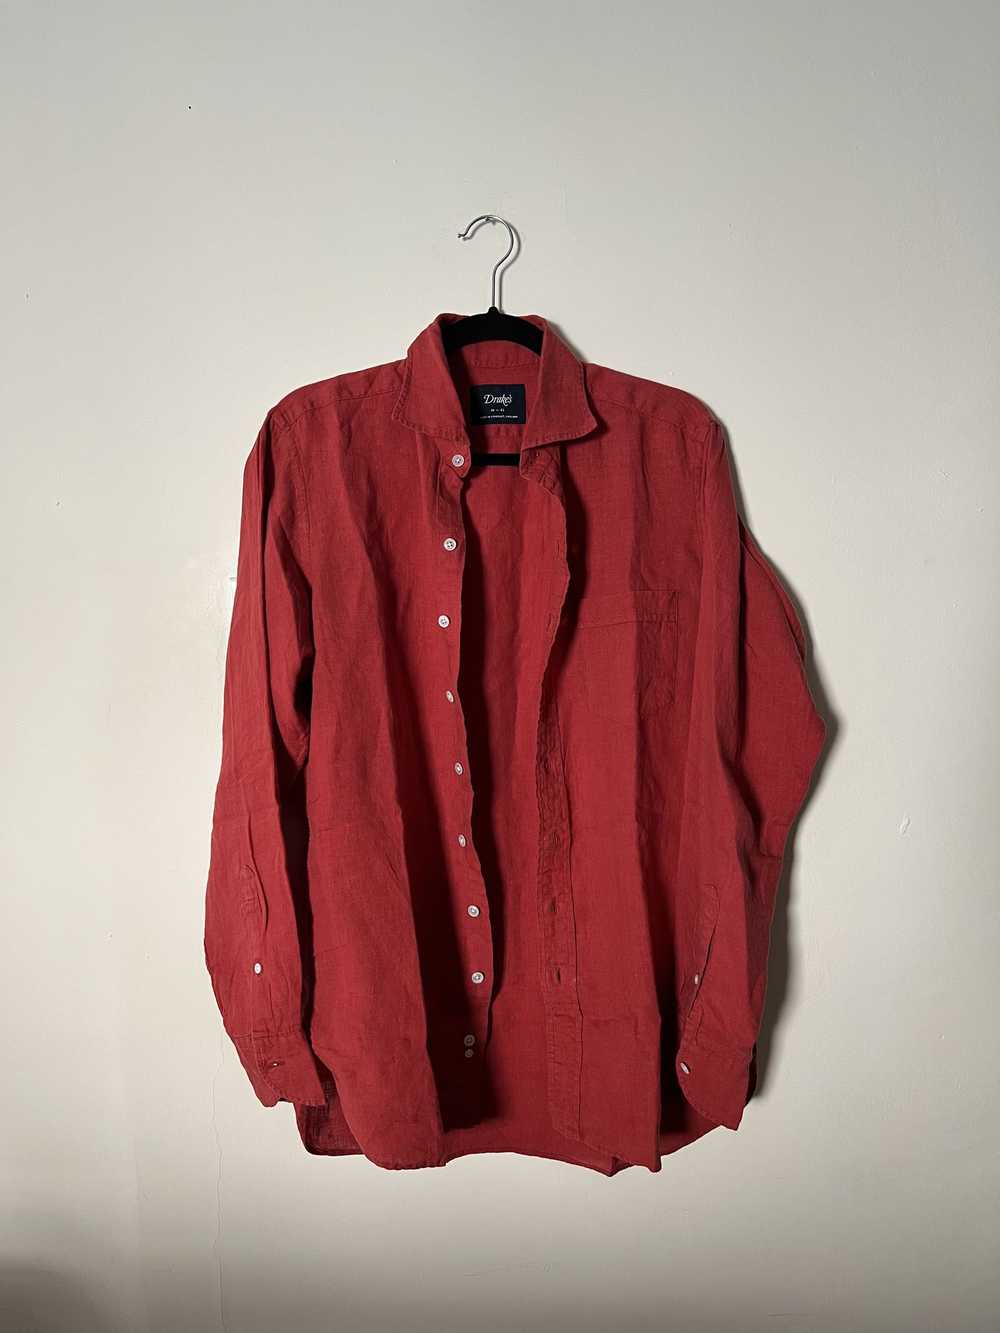 Drakes Drakes Linen Shirt Made in England size 41 - image 2